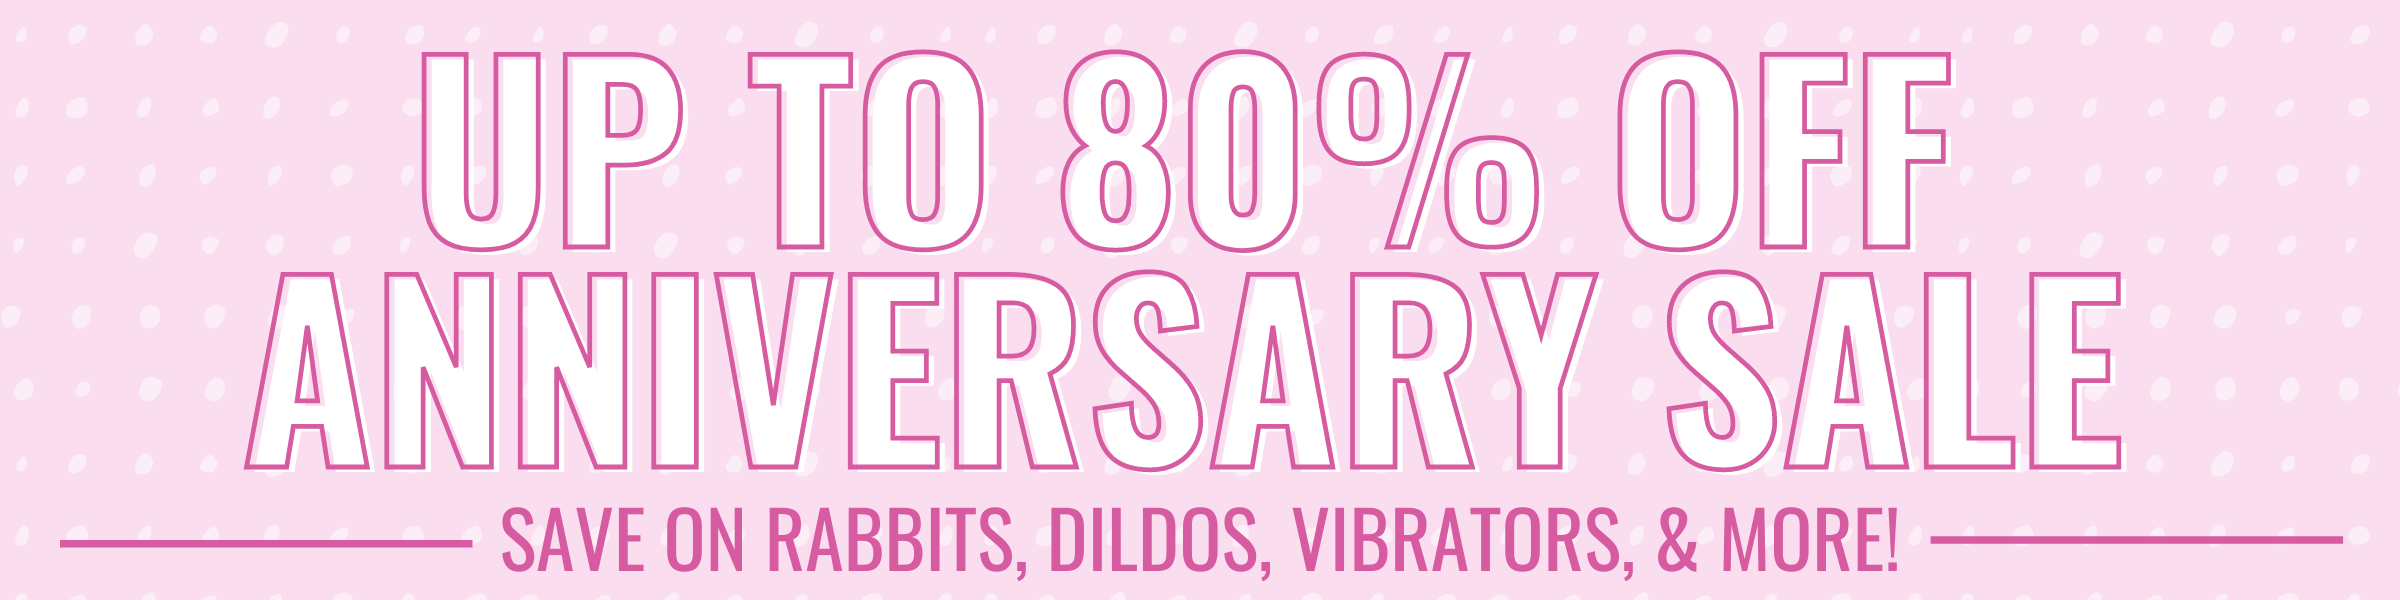 Get up to 80% off our best selling vibrators, dildos, and male sex toys with code: BDAY 22 at checkout! Image reads: "Up to 80% off anniversary sale! - Save on rabbits, dildos, vibrators, and more!"